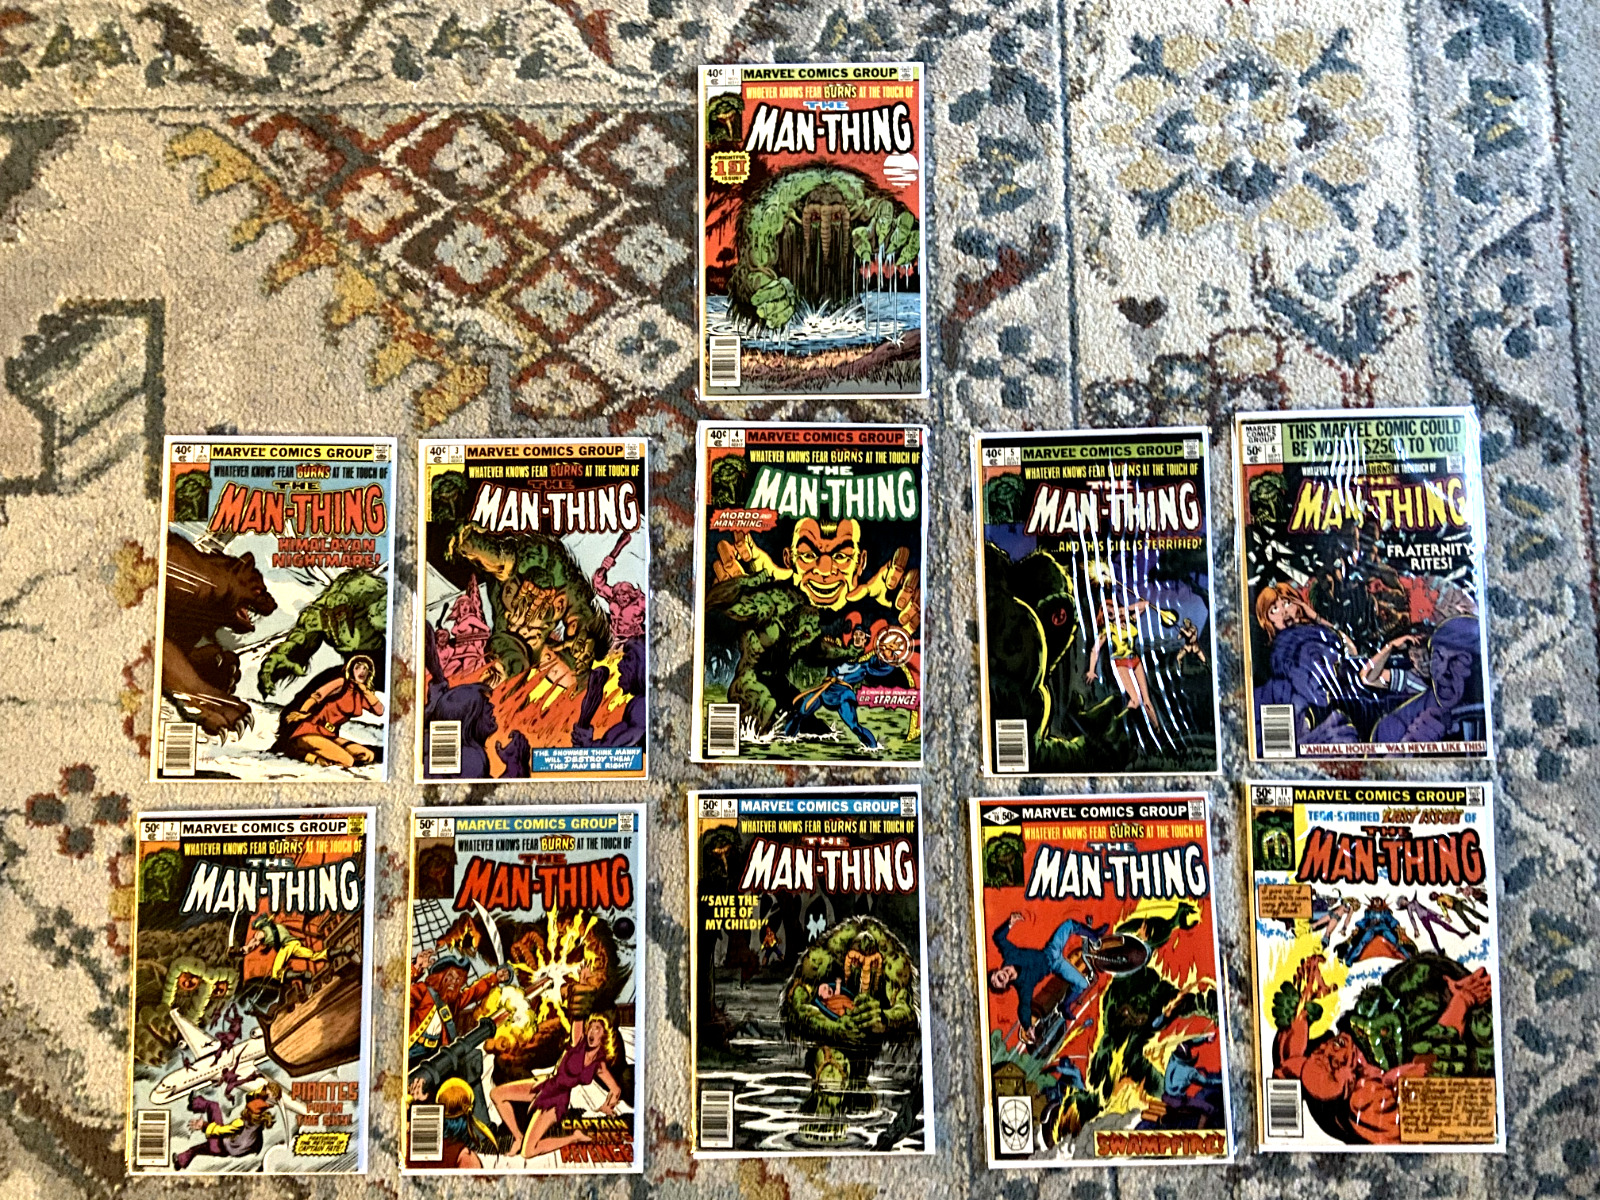 The Man-Thing #1-11